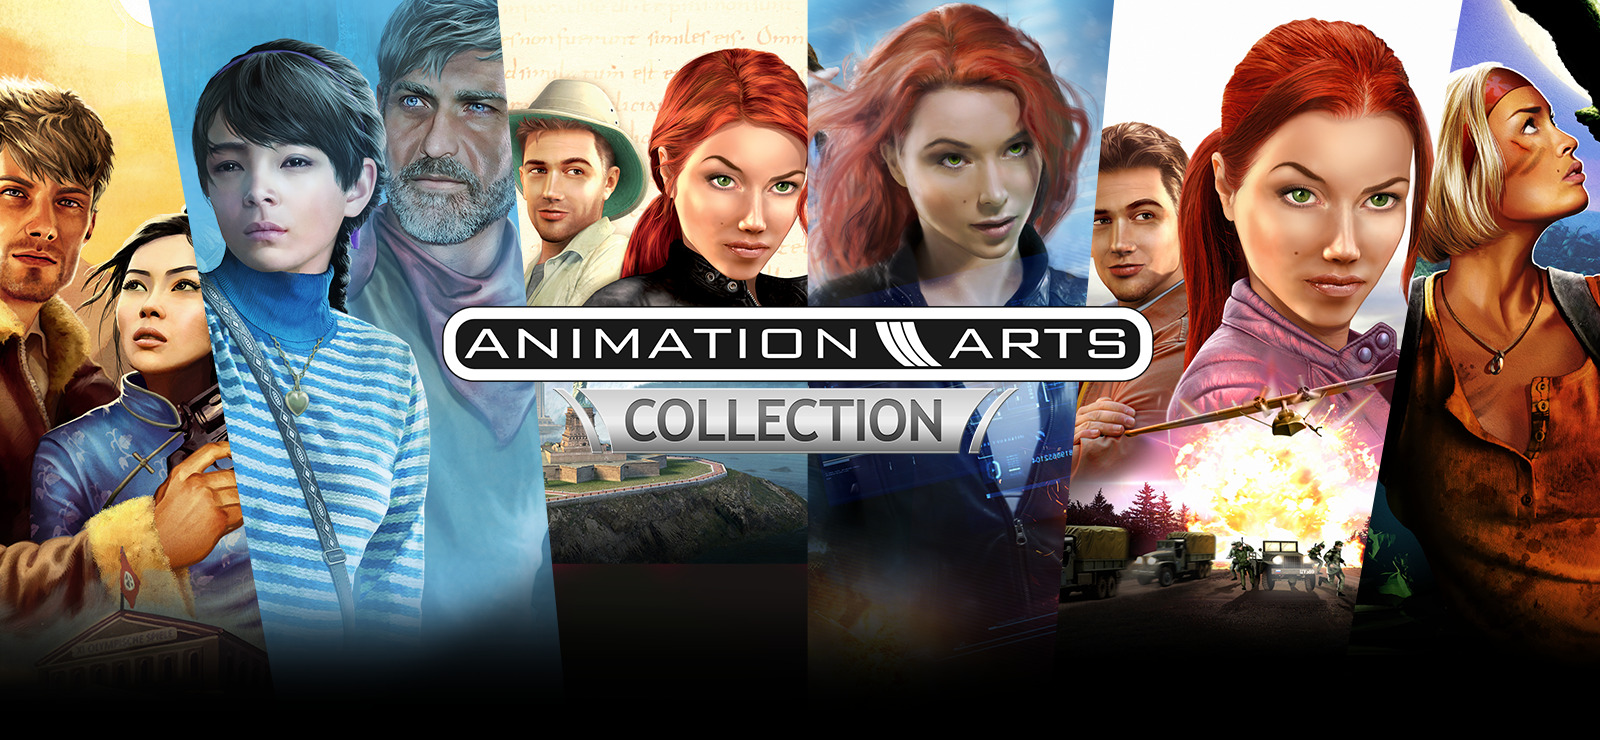 85% Animation Arts Collection on 